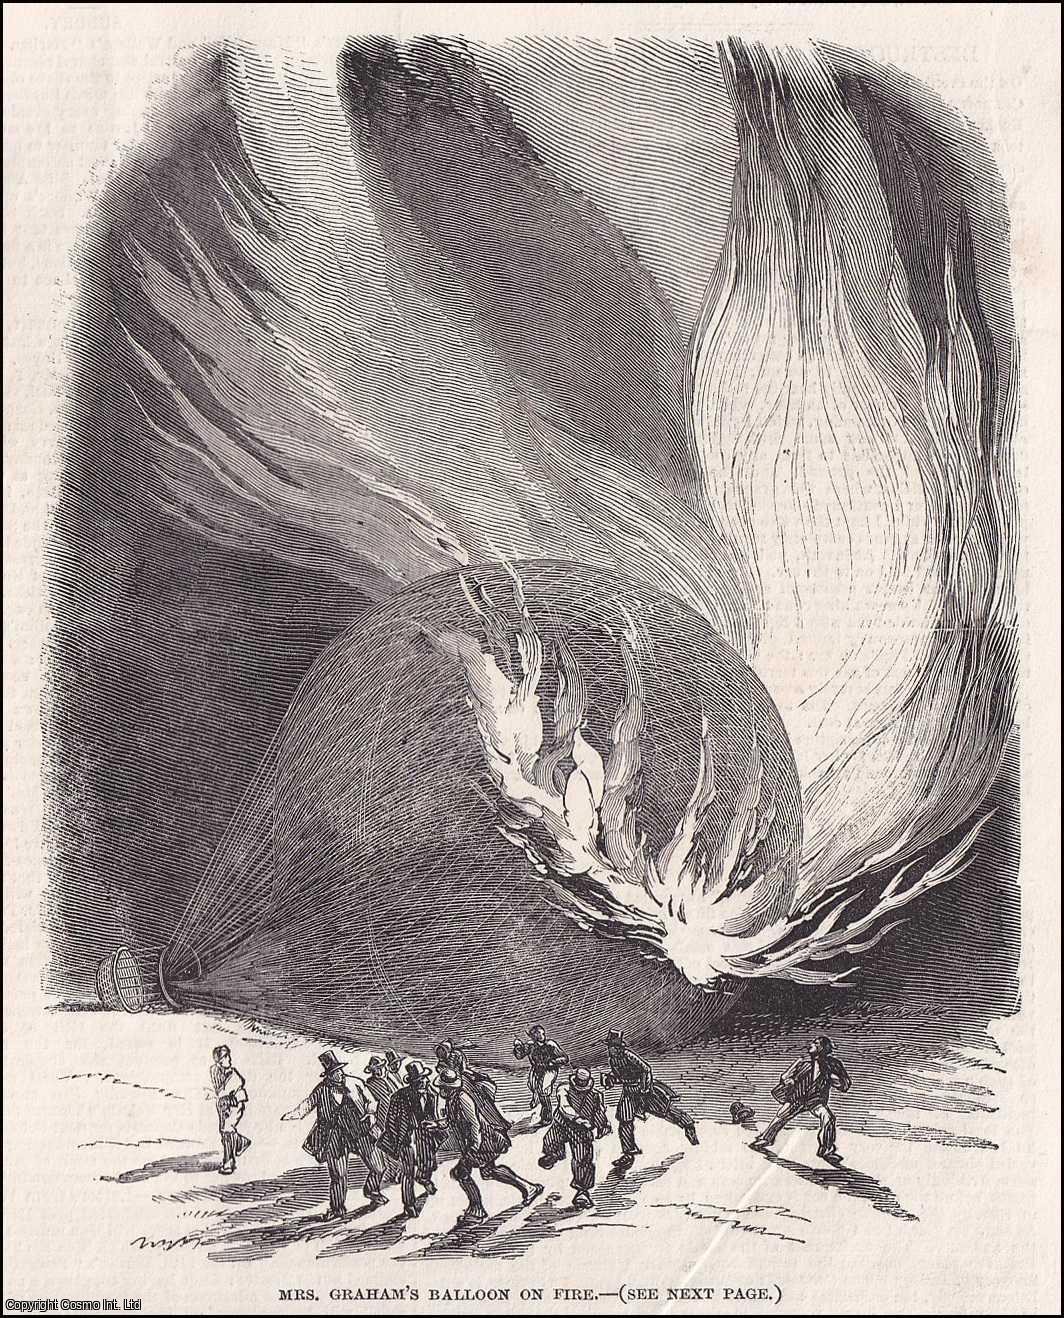 BALLOONING - Destruction of Mrs. Graham's Balloon by fire. An original print from the Illustrated London News, 1850.